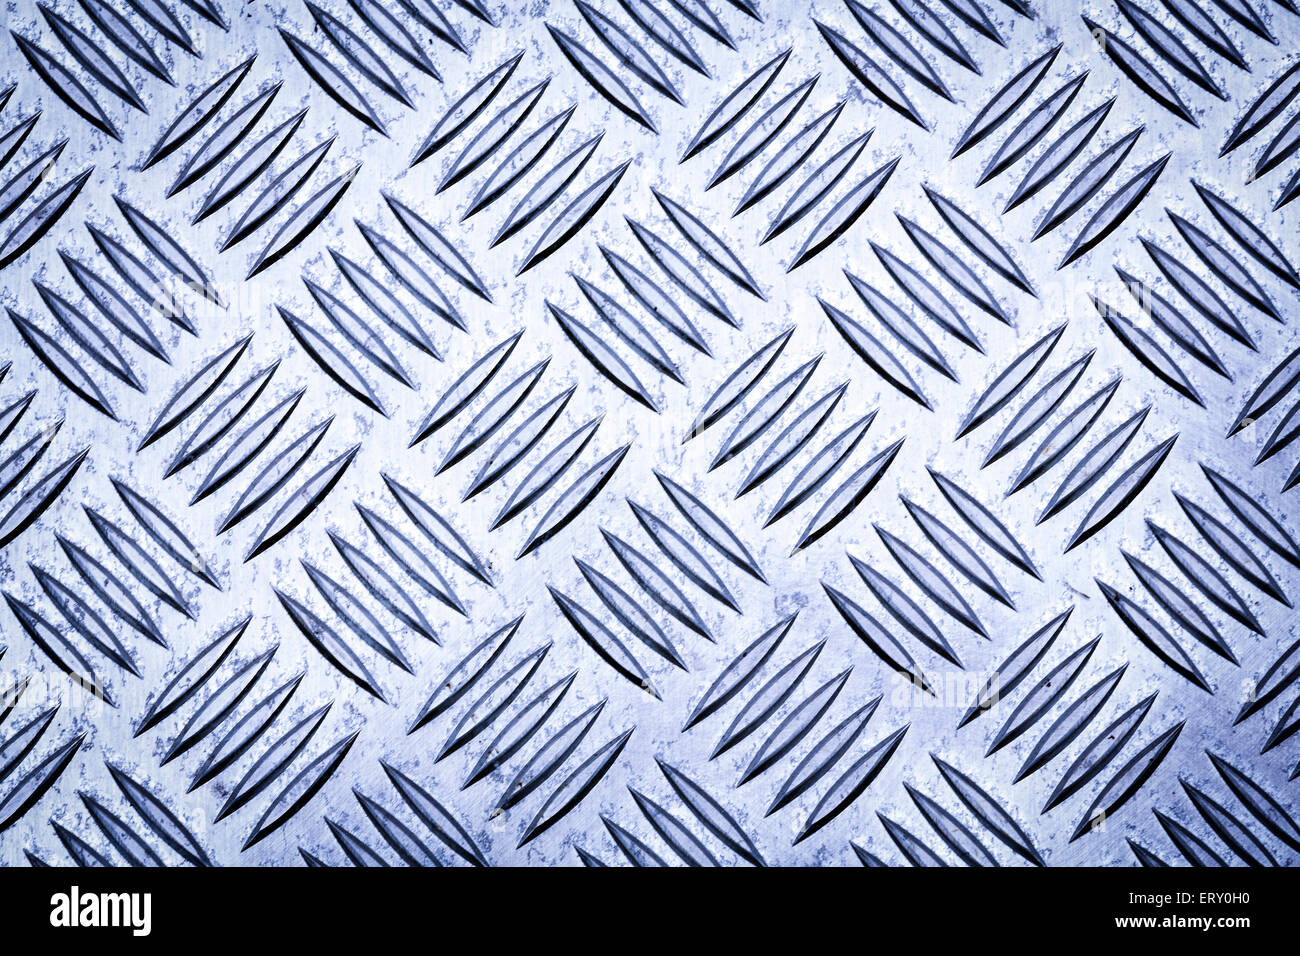 Blue colored diamond plate, checker plate,  tread plate, cross hatch kick plate and Durbar floor plate for texture background. Stock Photo